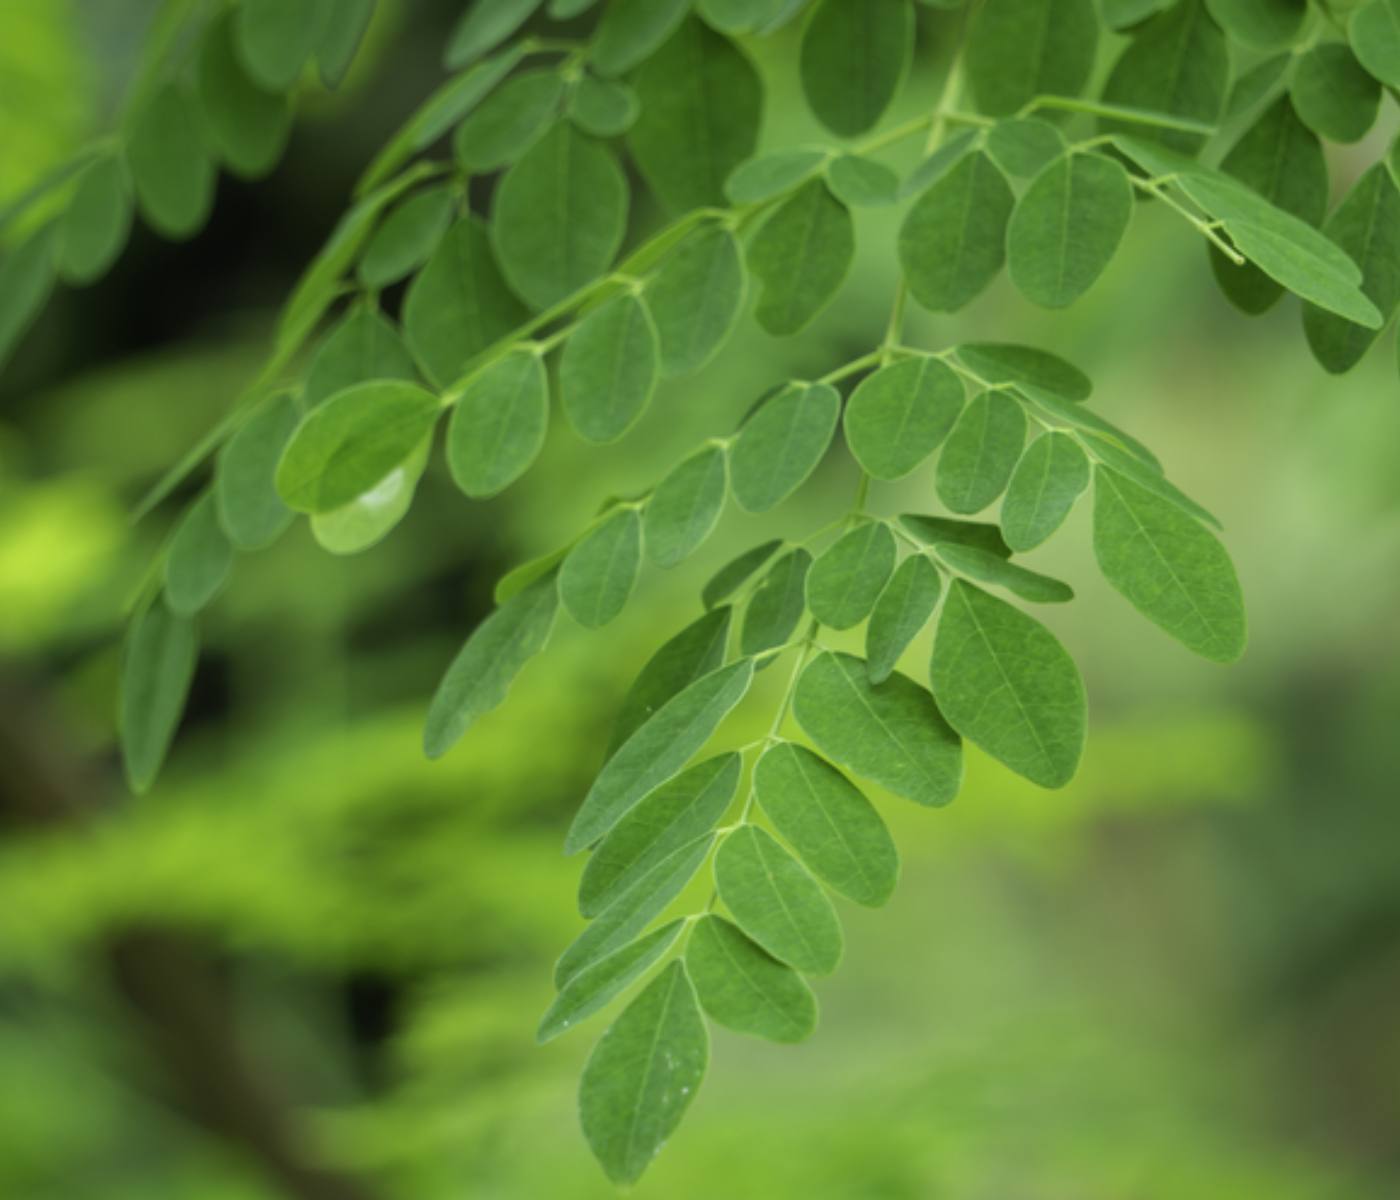 Beneficial effects of Moringa leaves for poultry diets